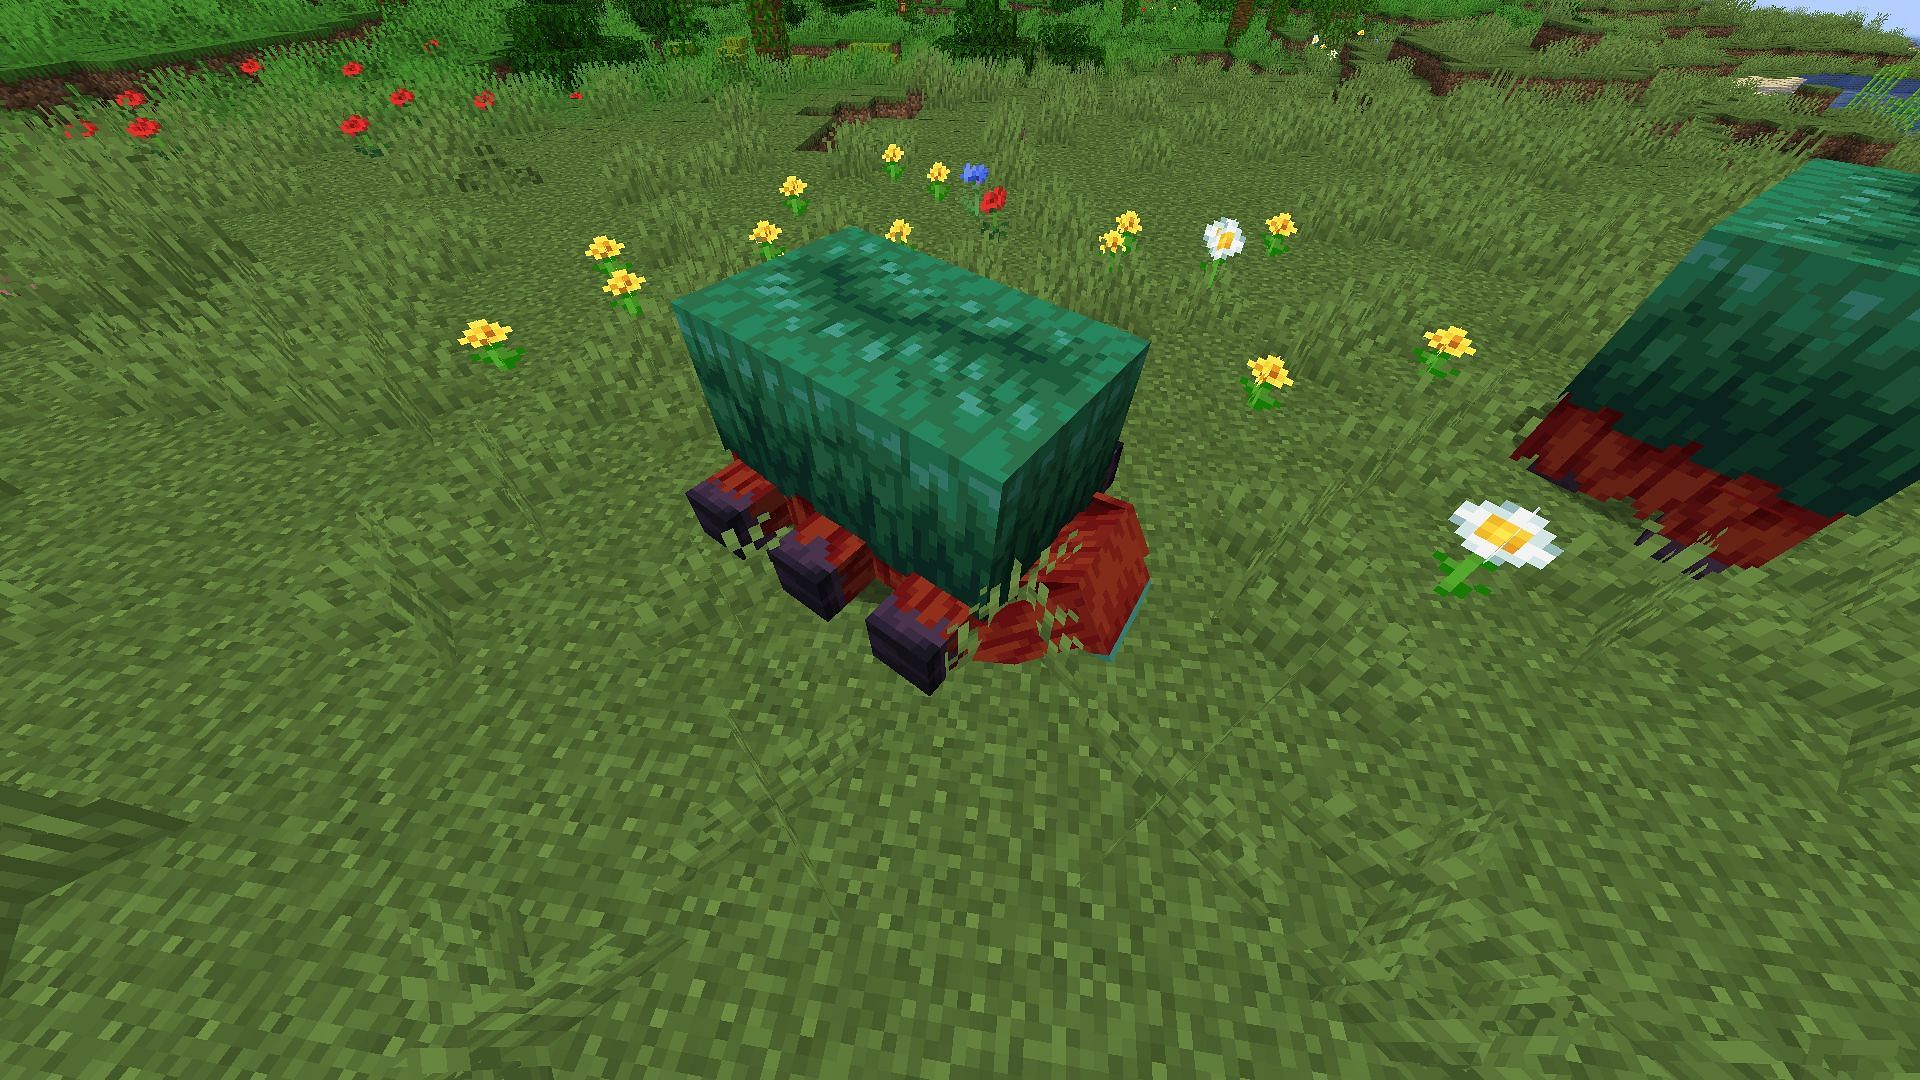 Sniffer will sniff the ground for torchflower seeds in Minecraft 1.20 update (Image via Mojang)